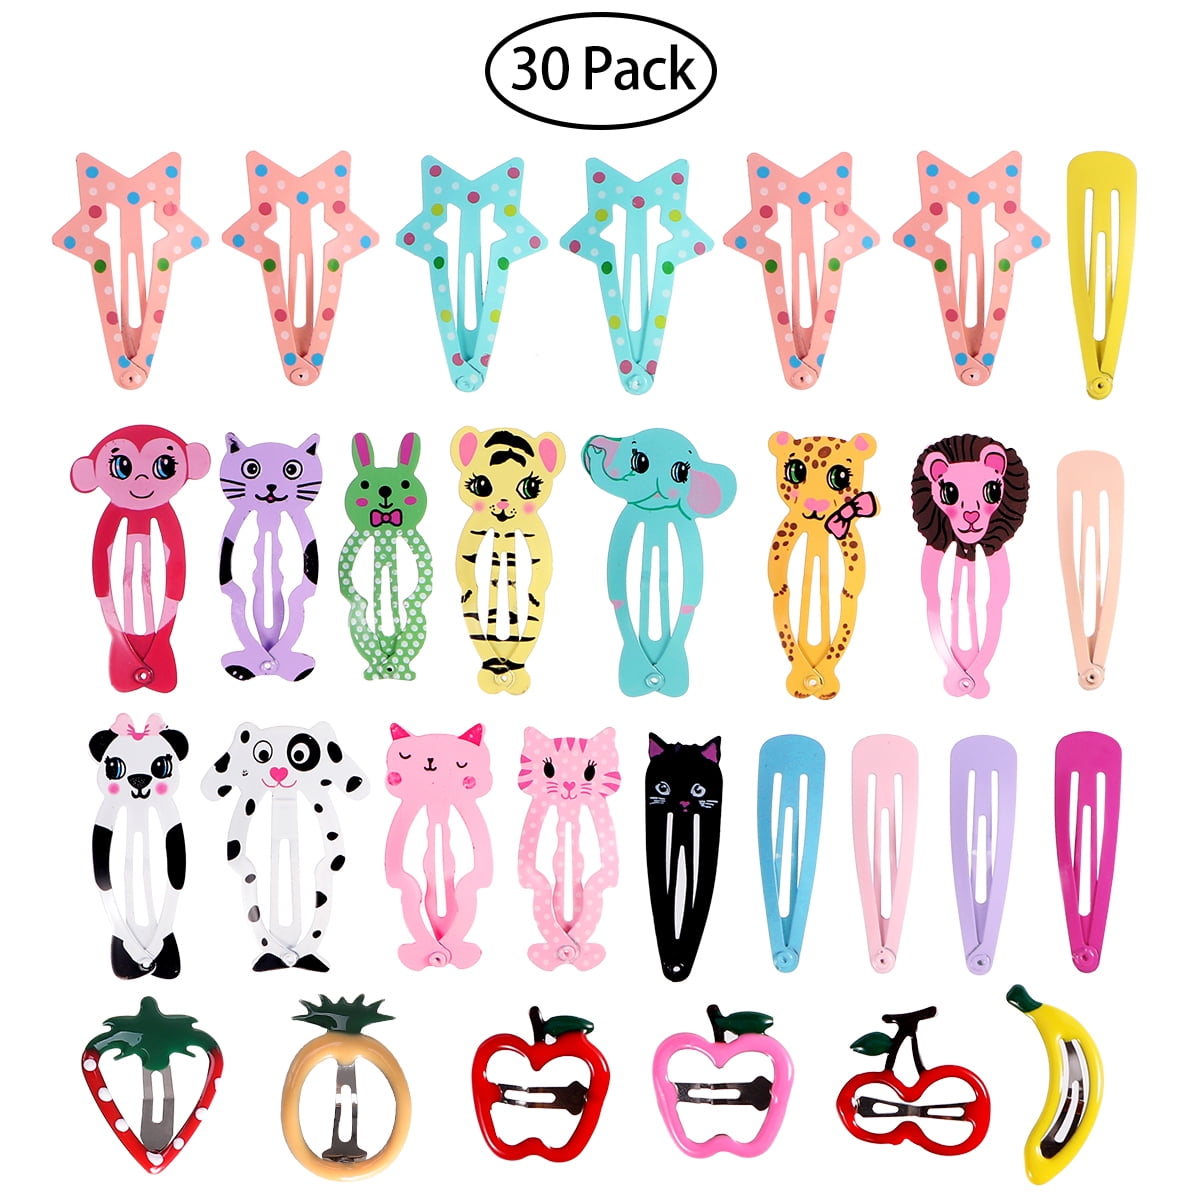 Frcolor 12Pcs Cartoon Crown Hair Clips Barrettes Hair Accessories for Babies Girls Toddlers Children Kids Teens Random Color 